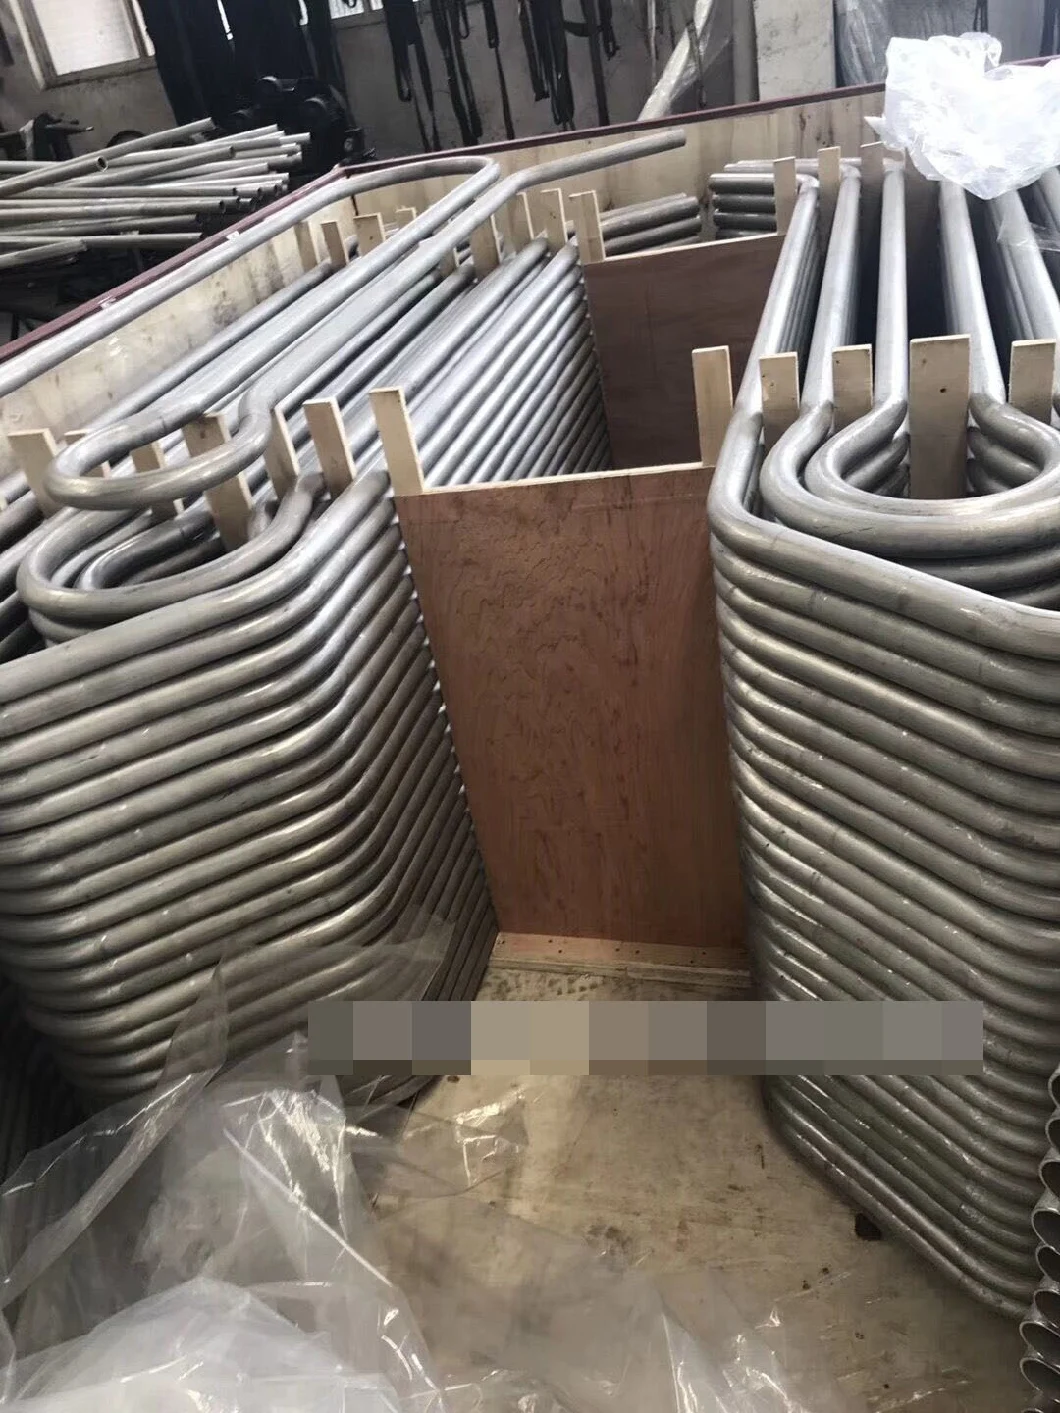 Cooling Tower Pipe/Heat Exchanger Tube/TP304L